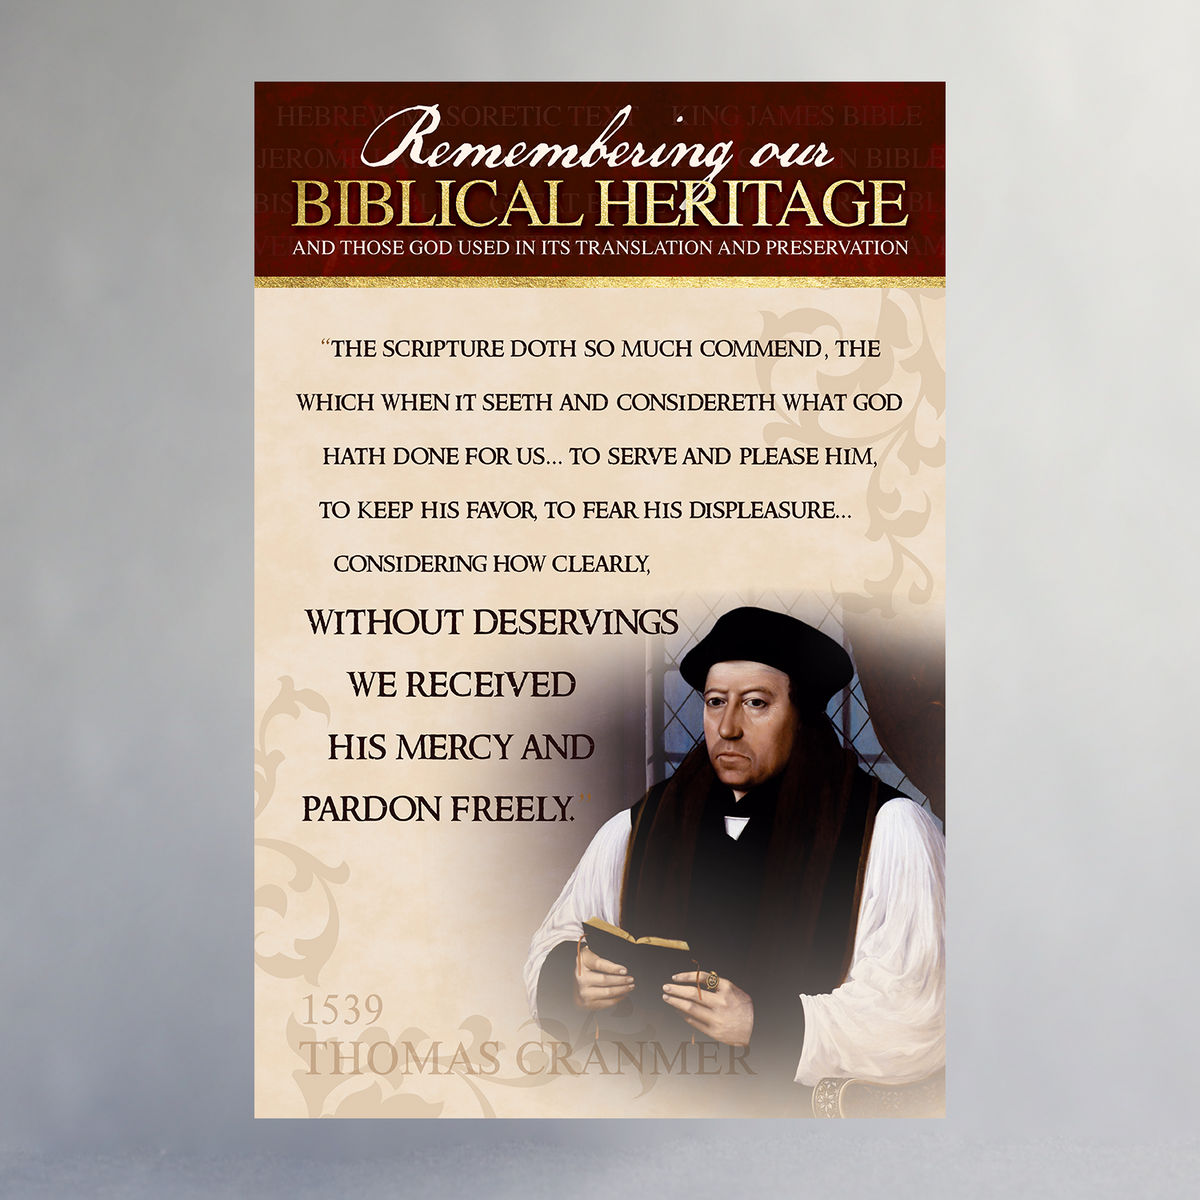 24&quot; x 36&quot; Biblical Heritage Poster Series - Entire Series (12 posters)